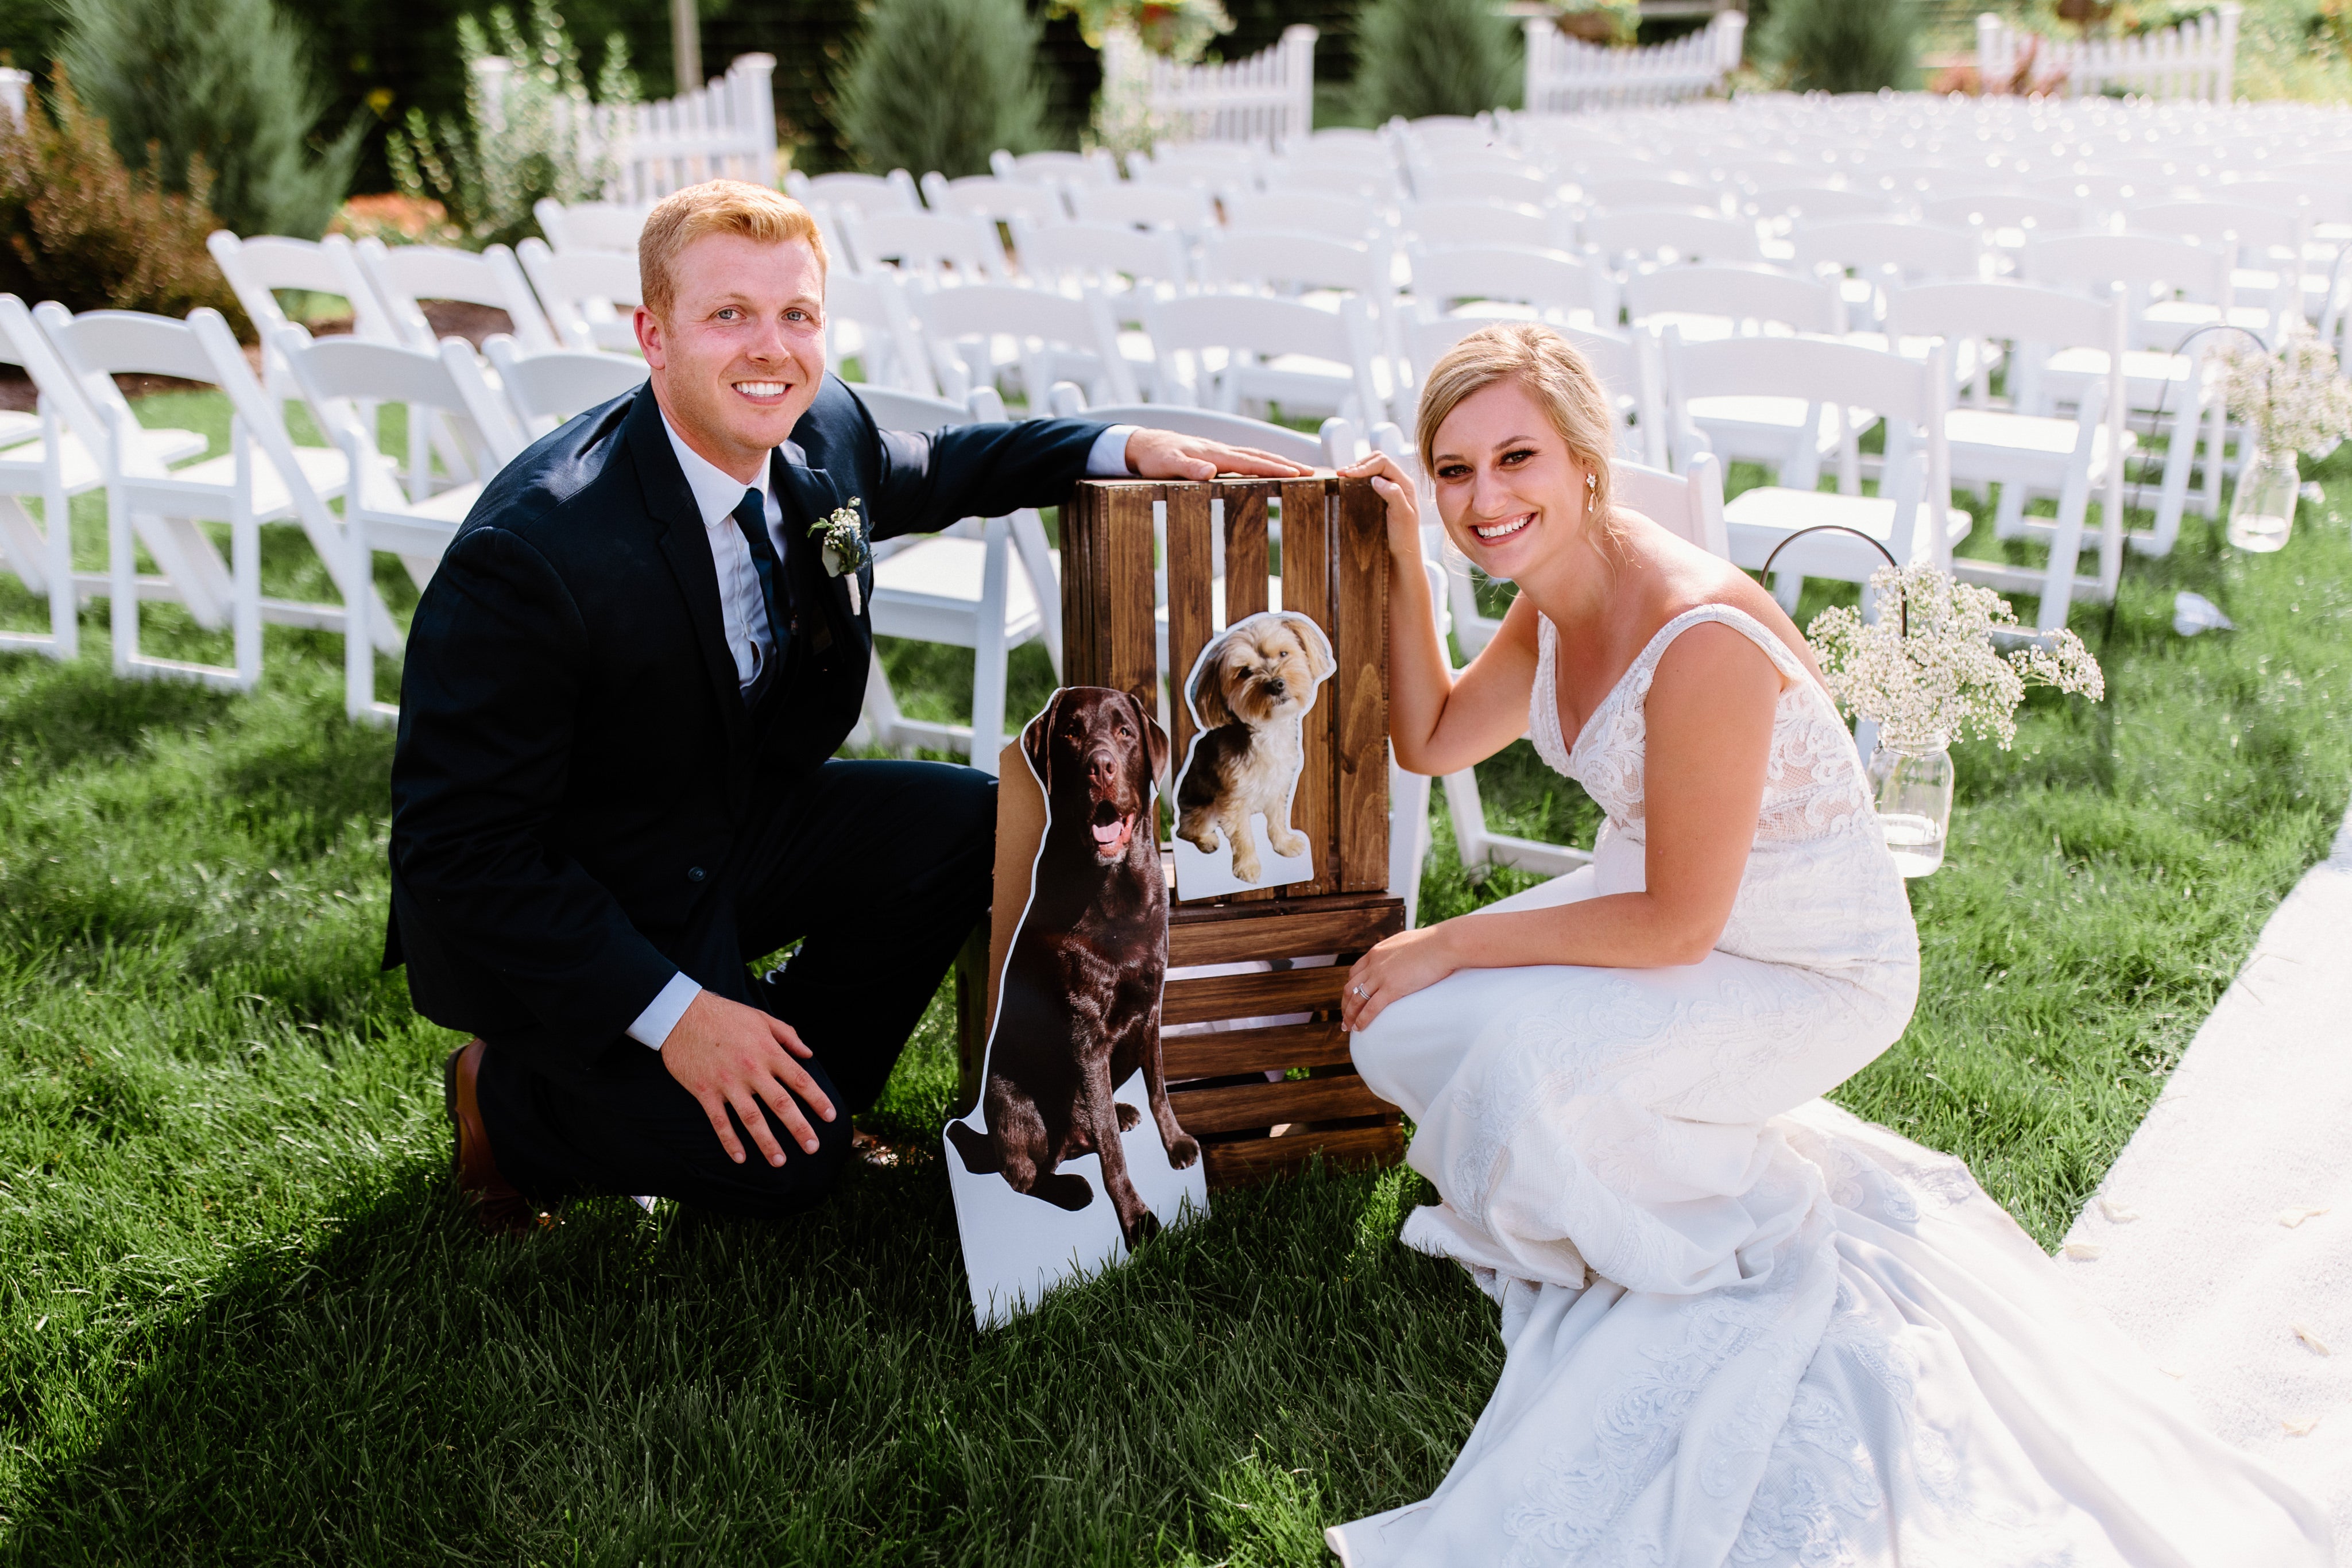 Melissa & her husband with her two dogs on their wedding day.